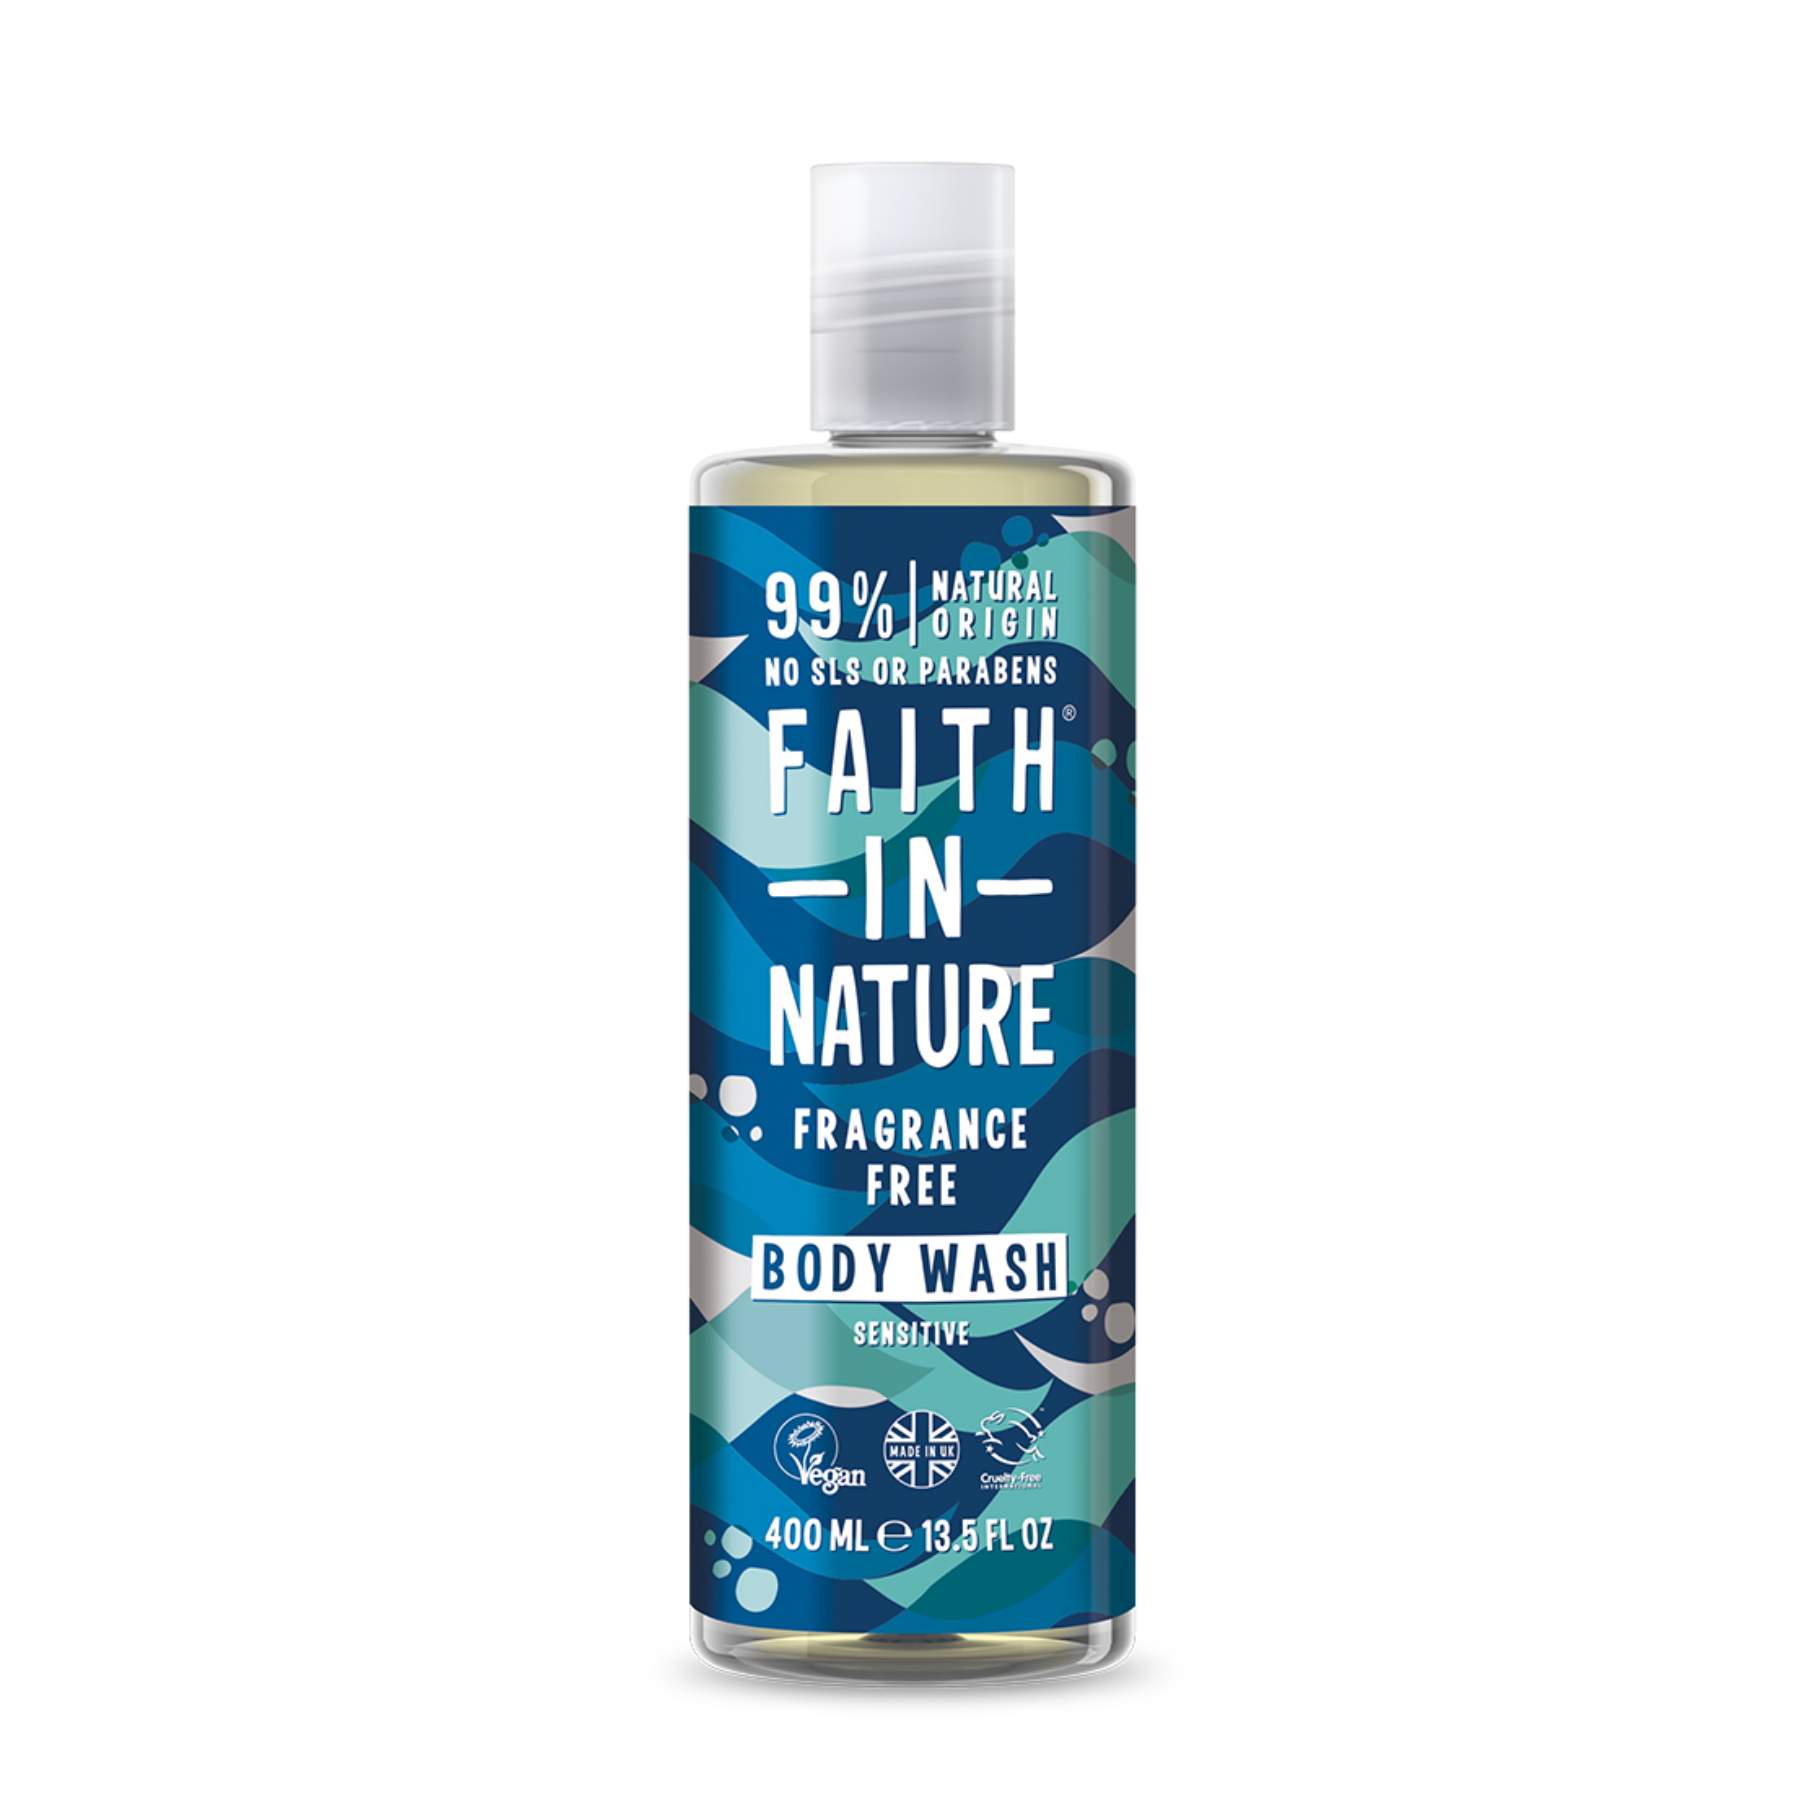 Shop Faith in Nature Body Wash - Fragrance Free 400 ml on Sublime Life. Hypoallergenic body wash for sensitive skin